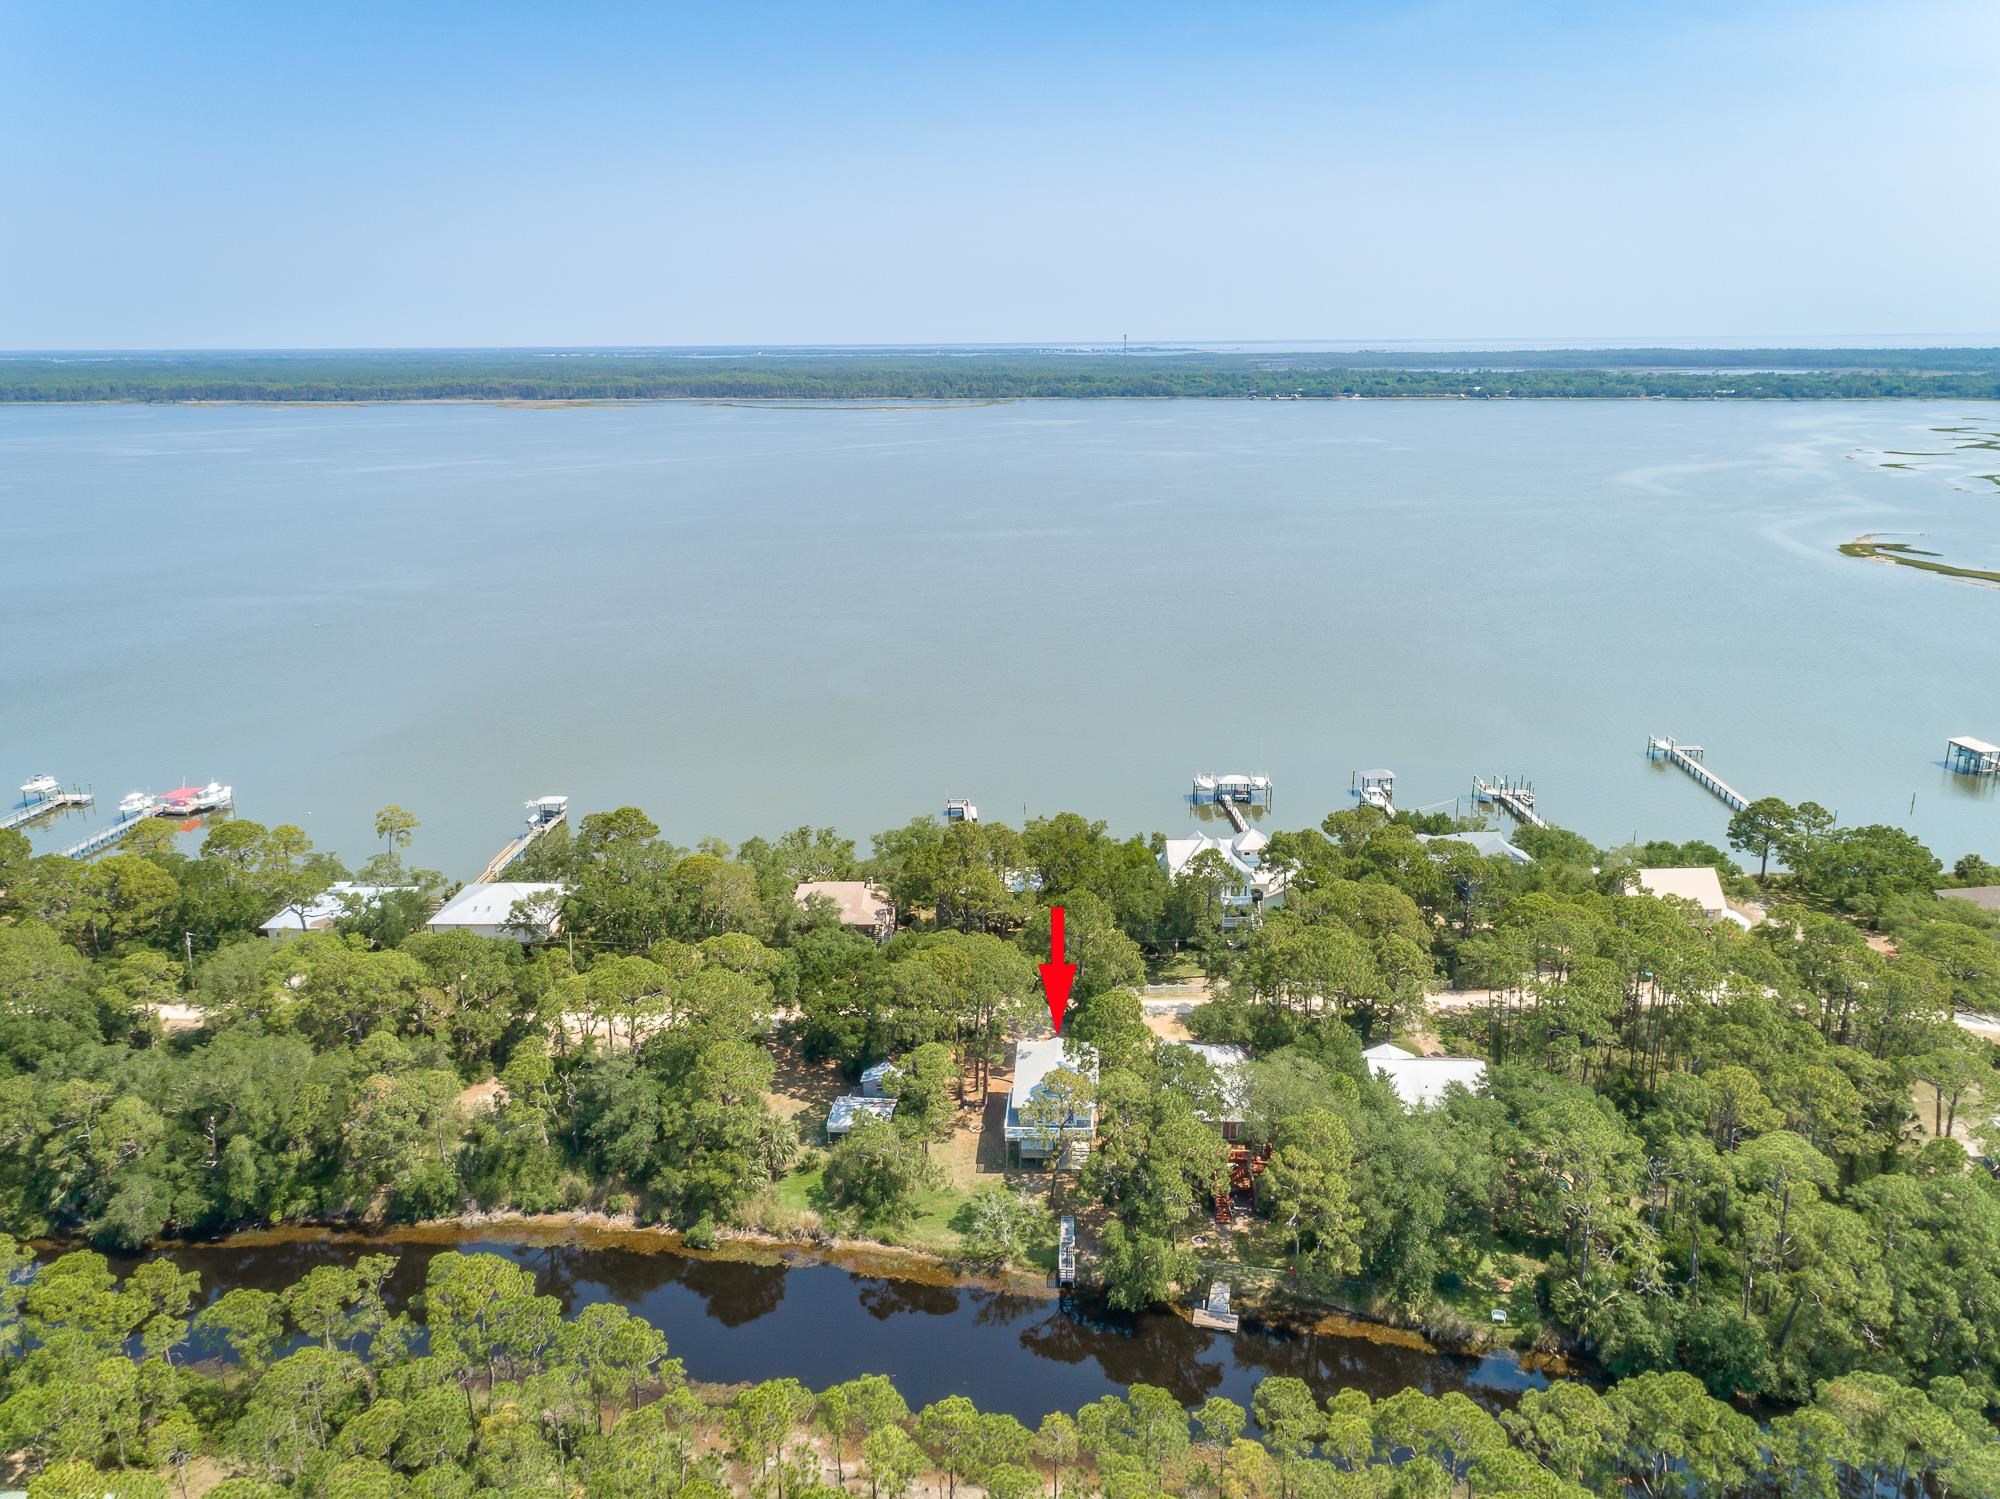 168 Harbor Circle,ALLIGATOR POINT,Florida 32346,2 Bedrooms Bedrooms,1 BathroomBathrooms,Detached single family,168 Harbor Circle,365681